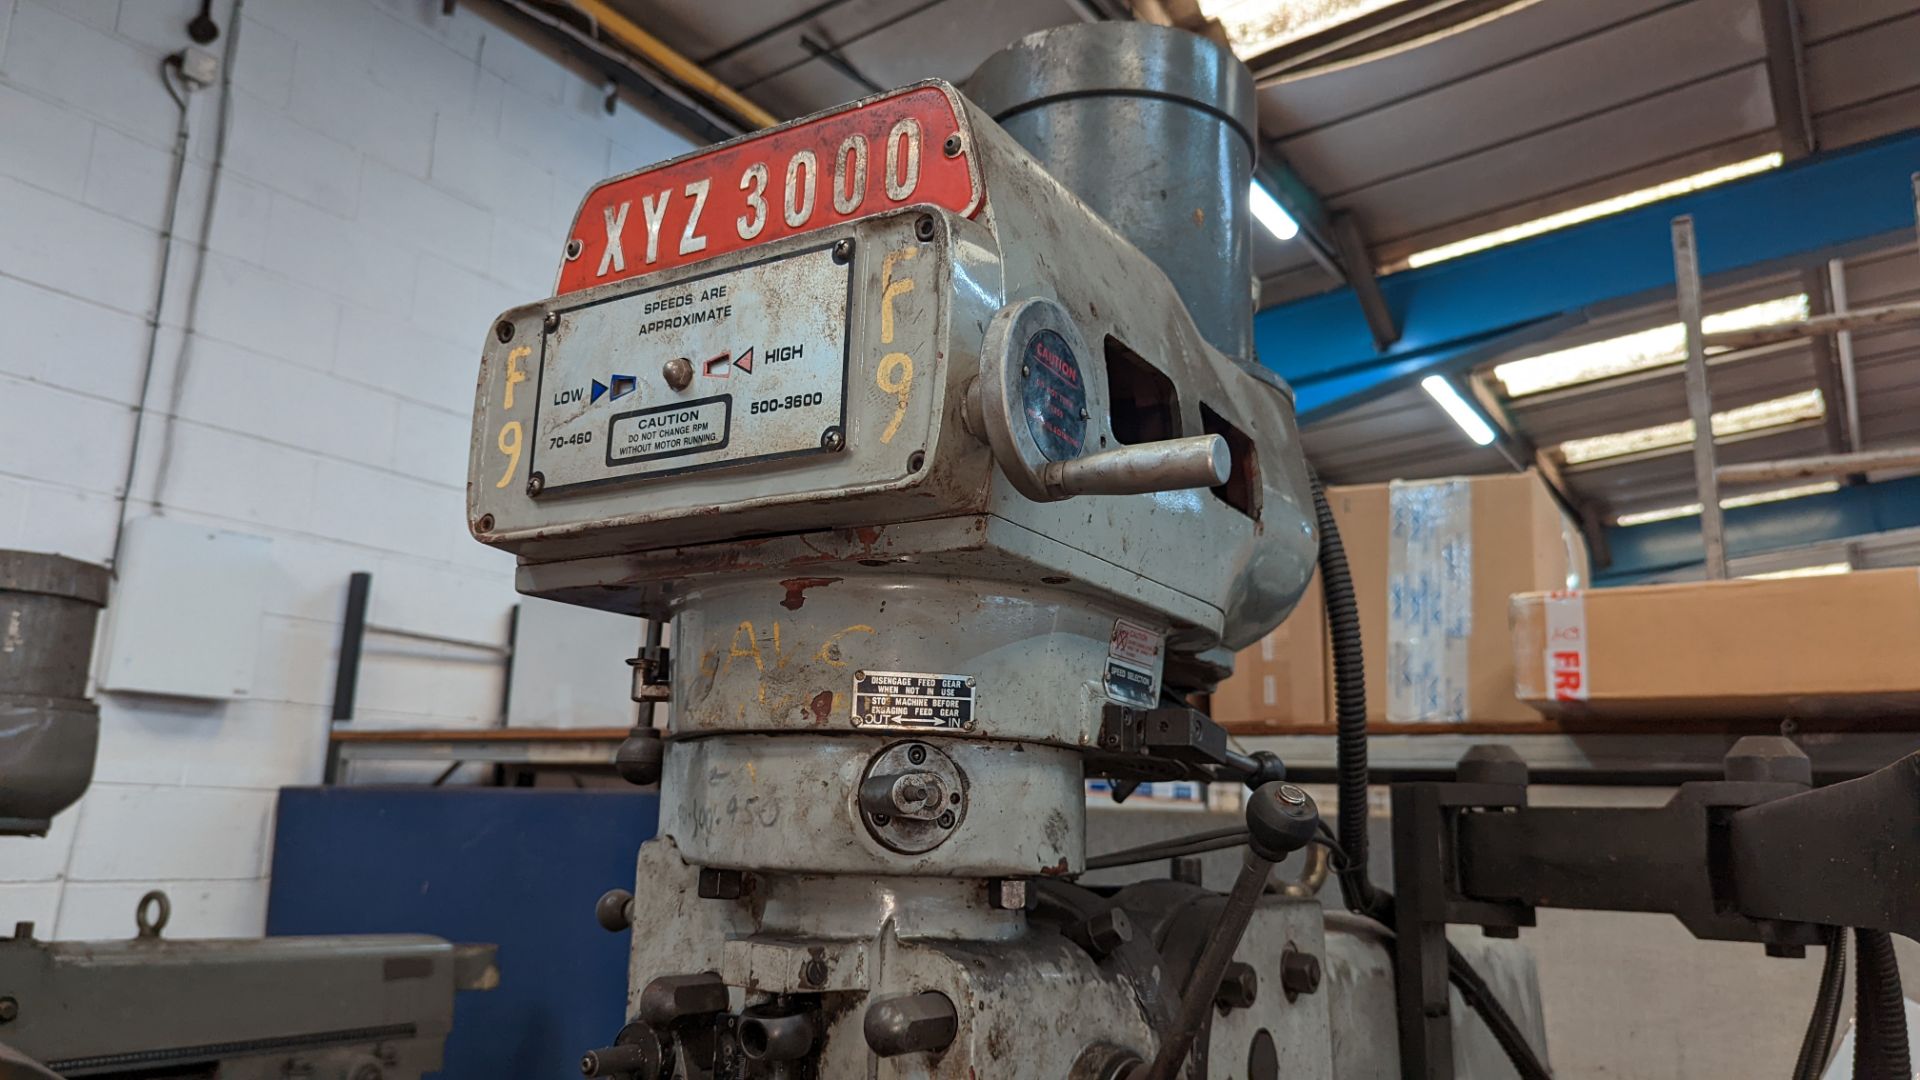 XYZ 3000 KR-V3000 turret mill with Newell DRO & Align CE-500S power feed - Image 11 of 16